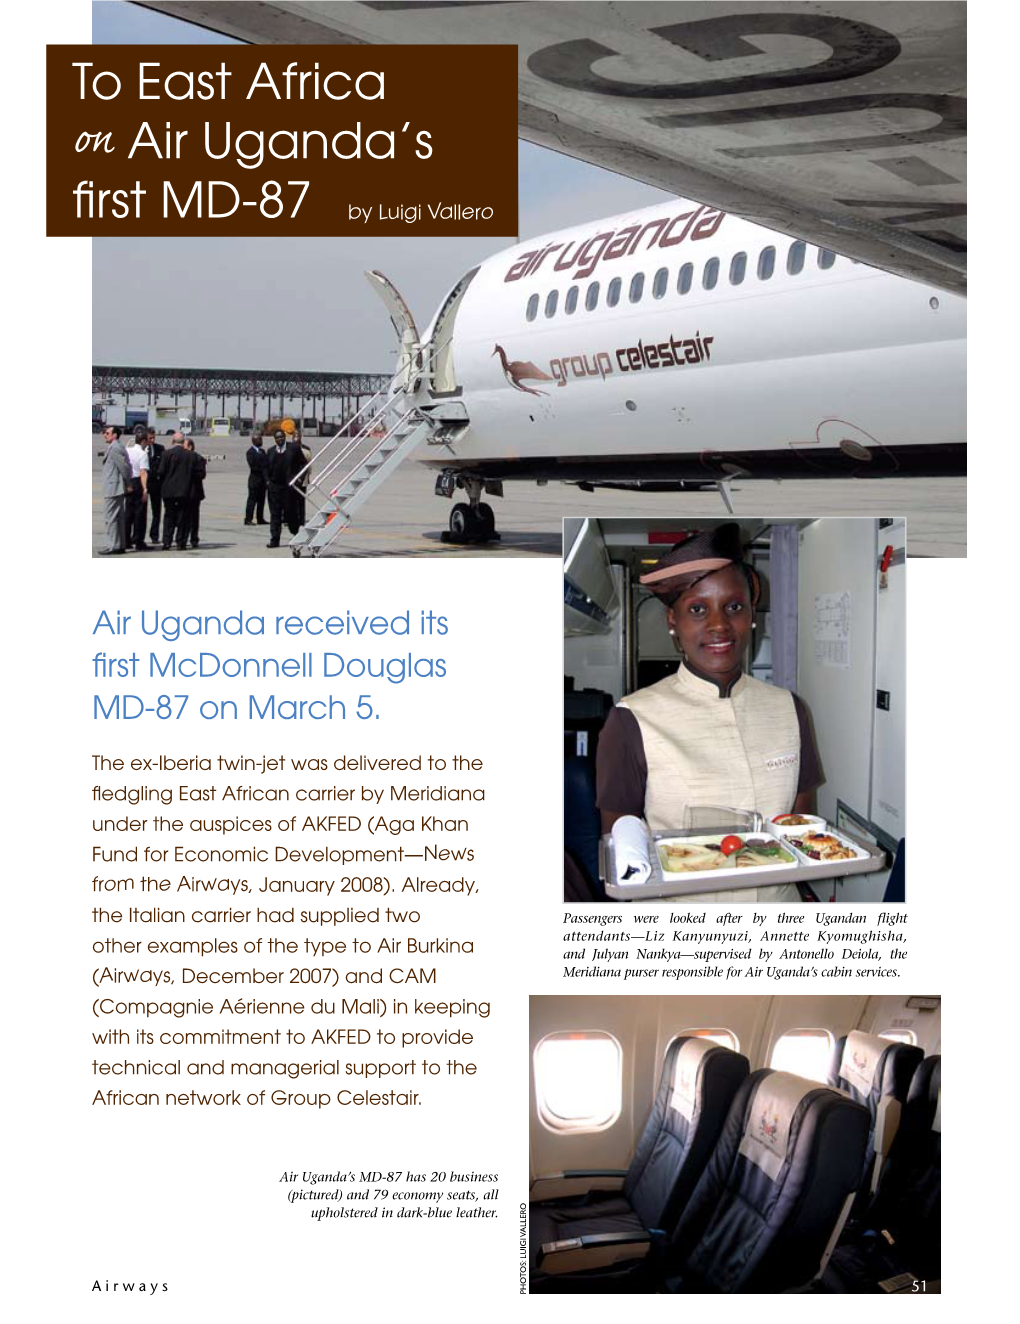 To East Africa on Air Uganda's First MD-87